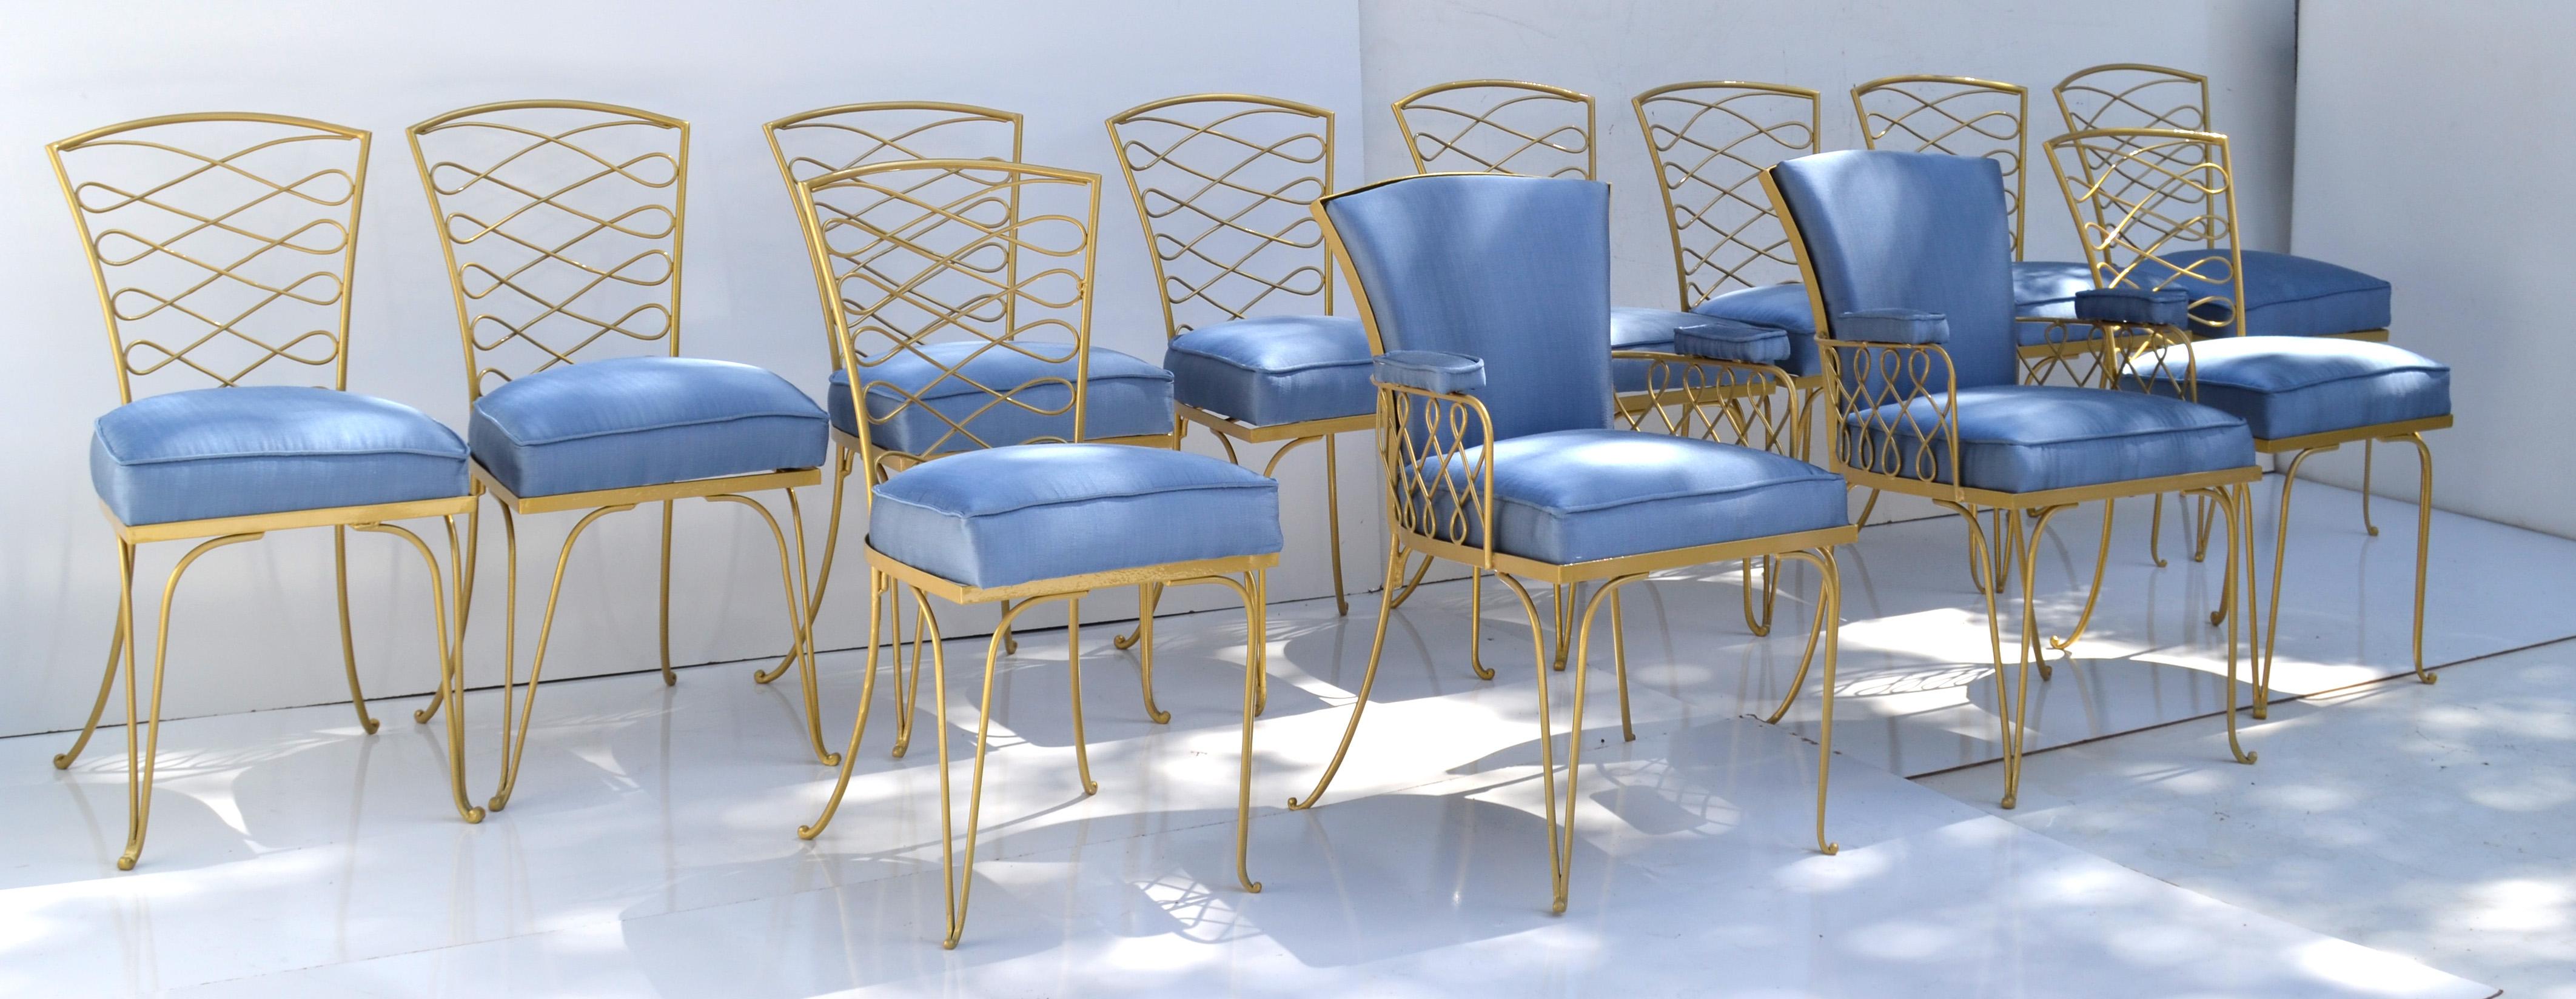 Set of 14 René Prou Art Deco Gold Wrought Iron Dining Room Chairs Blue Fabric  For Sale 11